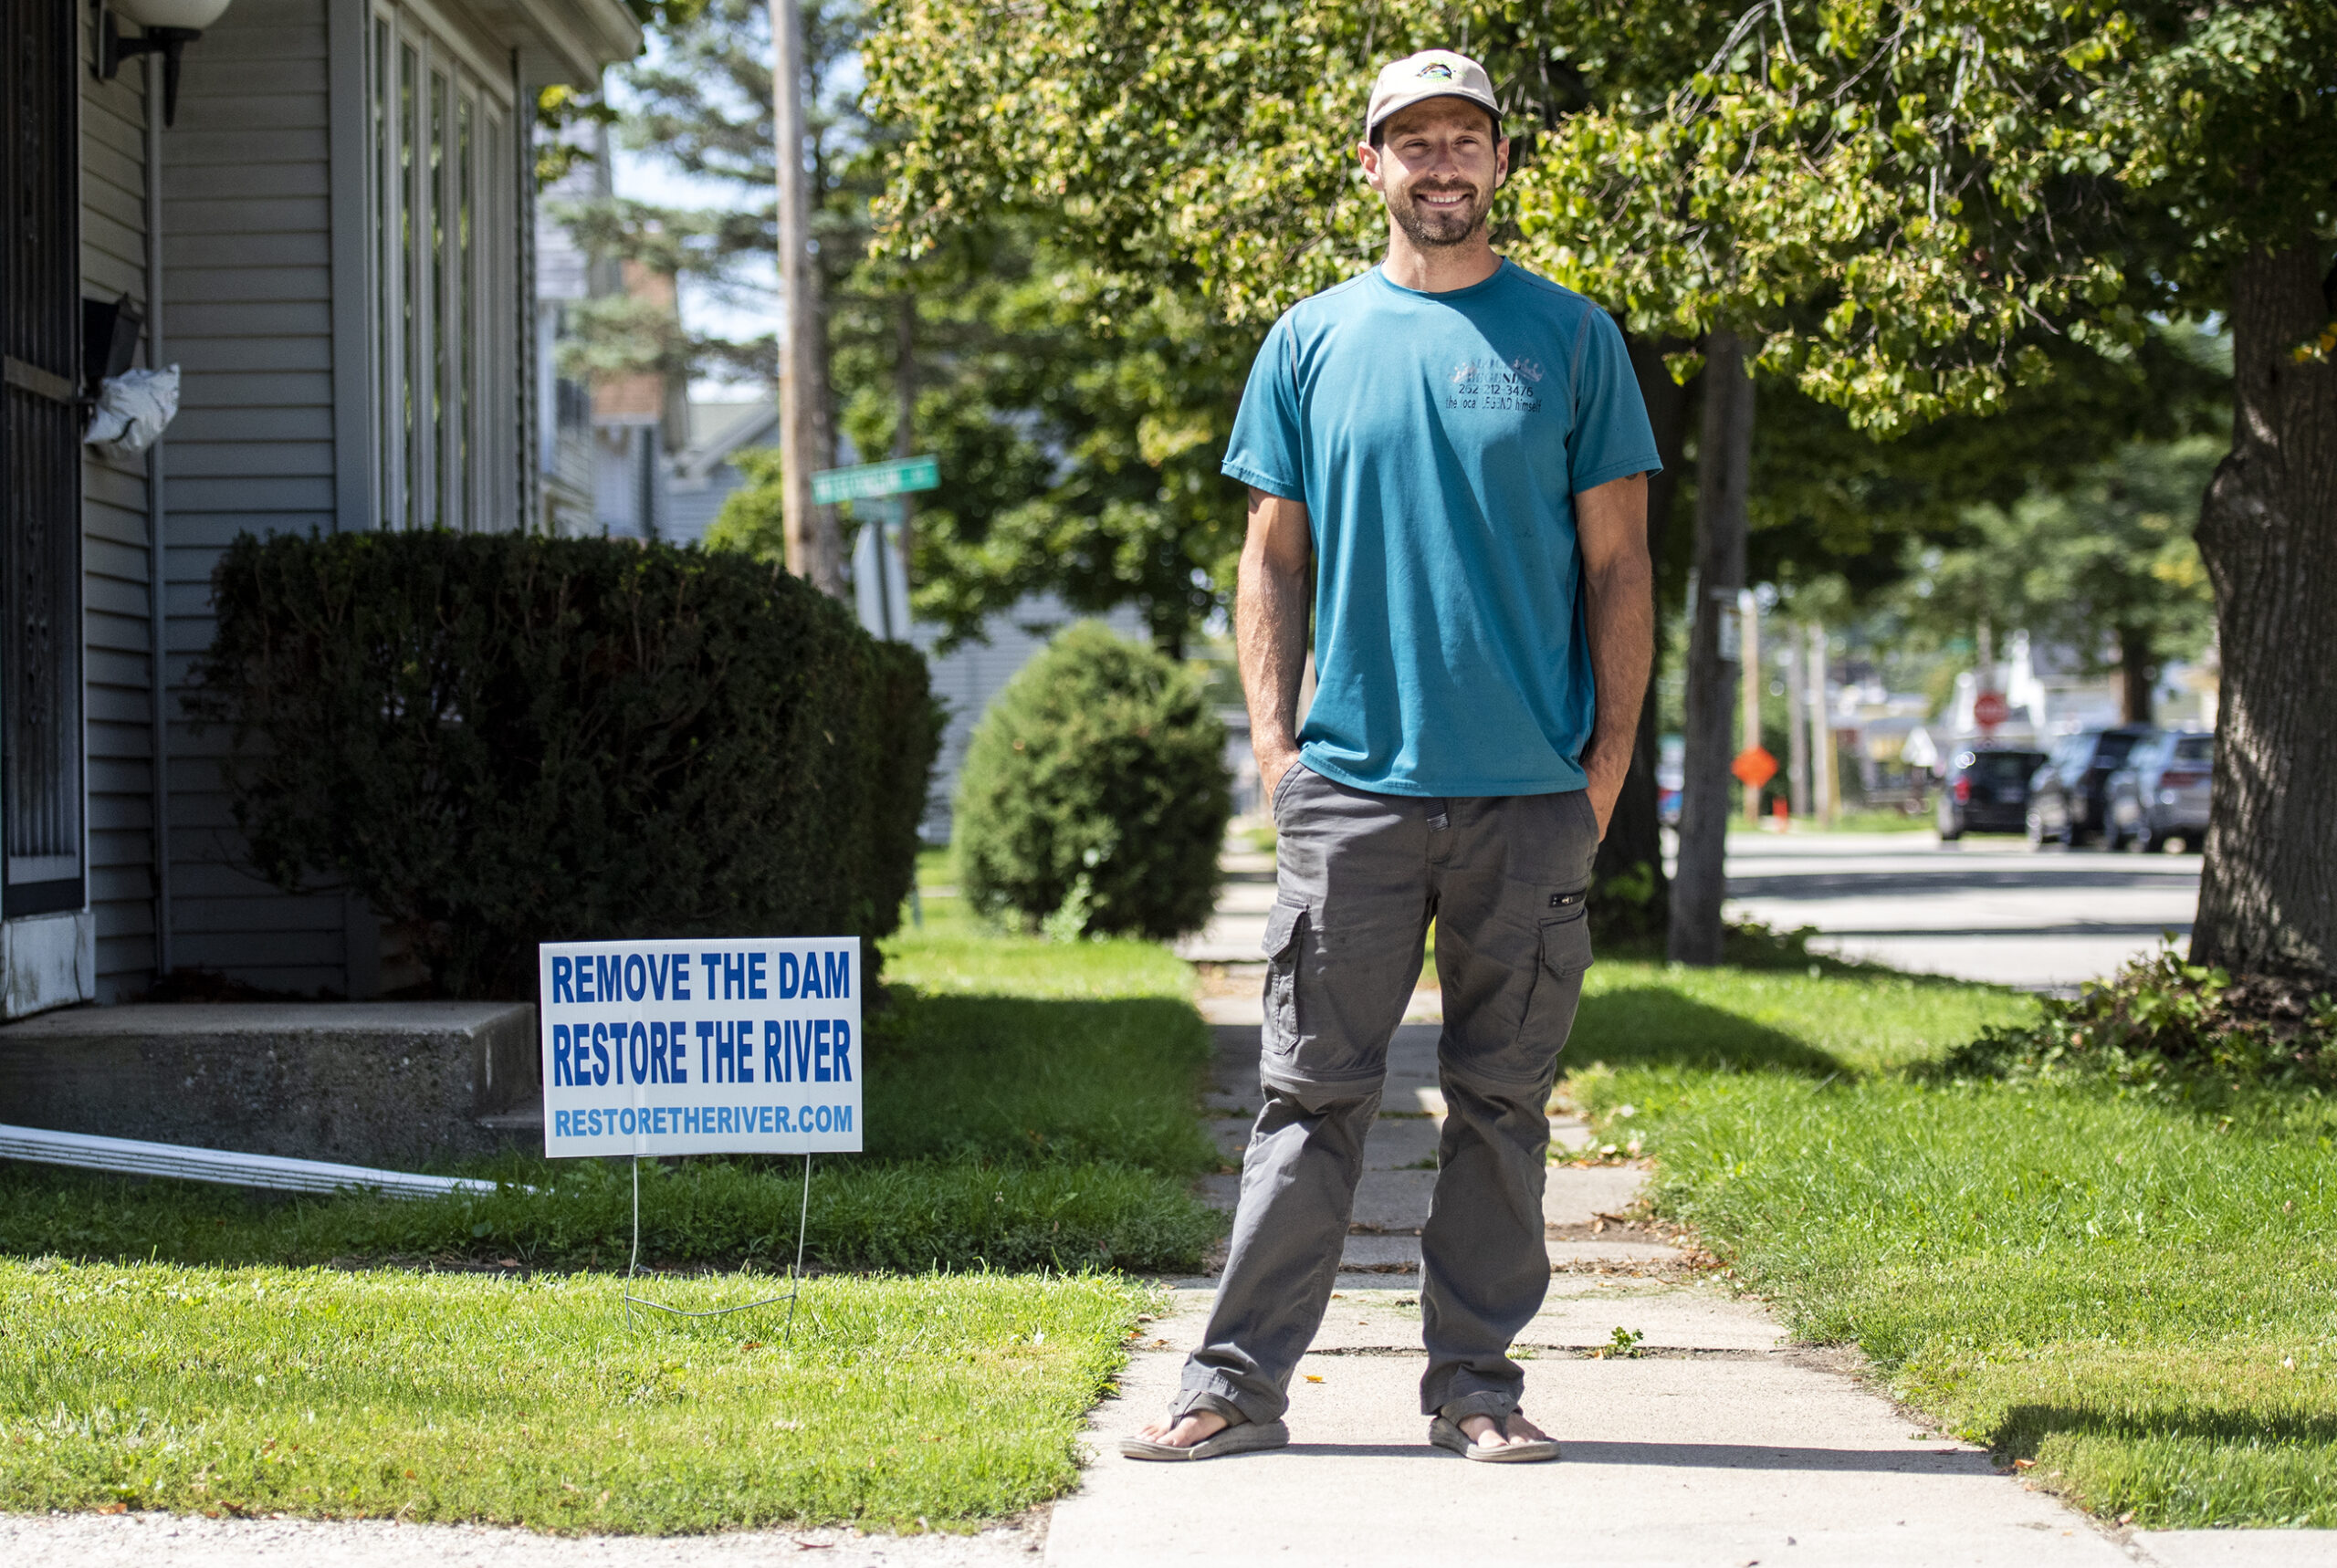 A man stands near a yard sign that says 